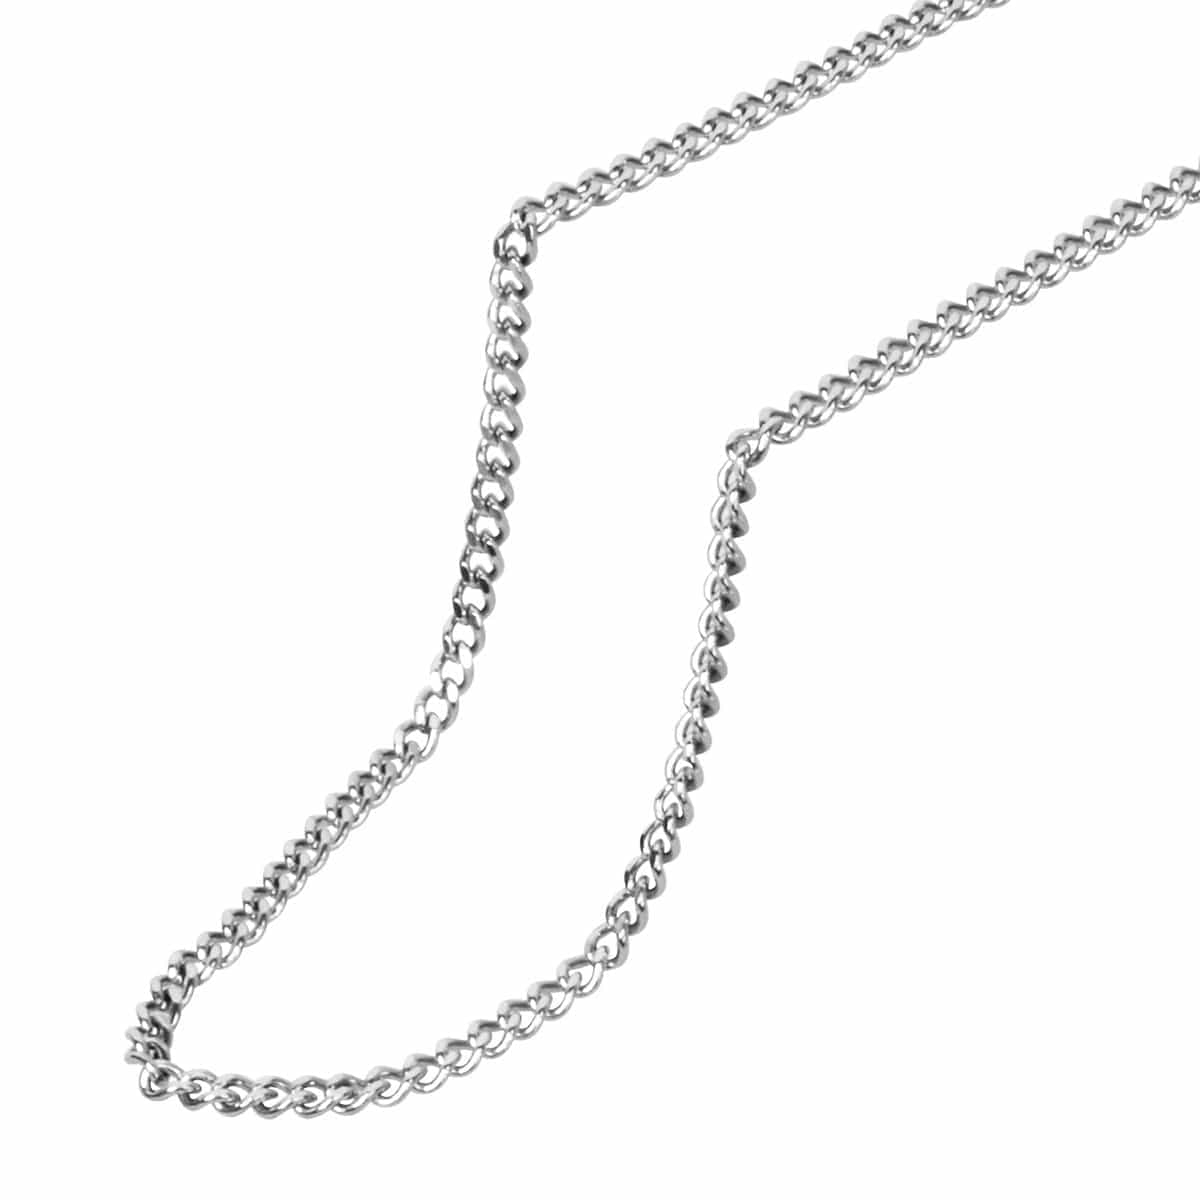 INOX JEWELRY Chains Silver Tone Stainless Steel 2mm Two-Face Diamond Cut Design Chain